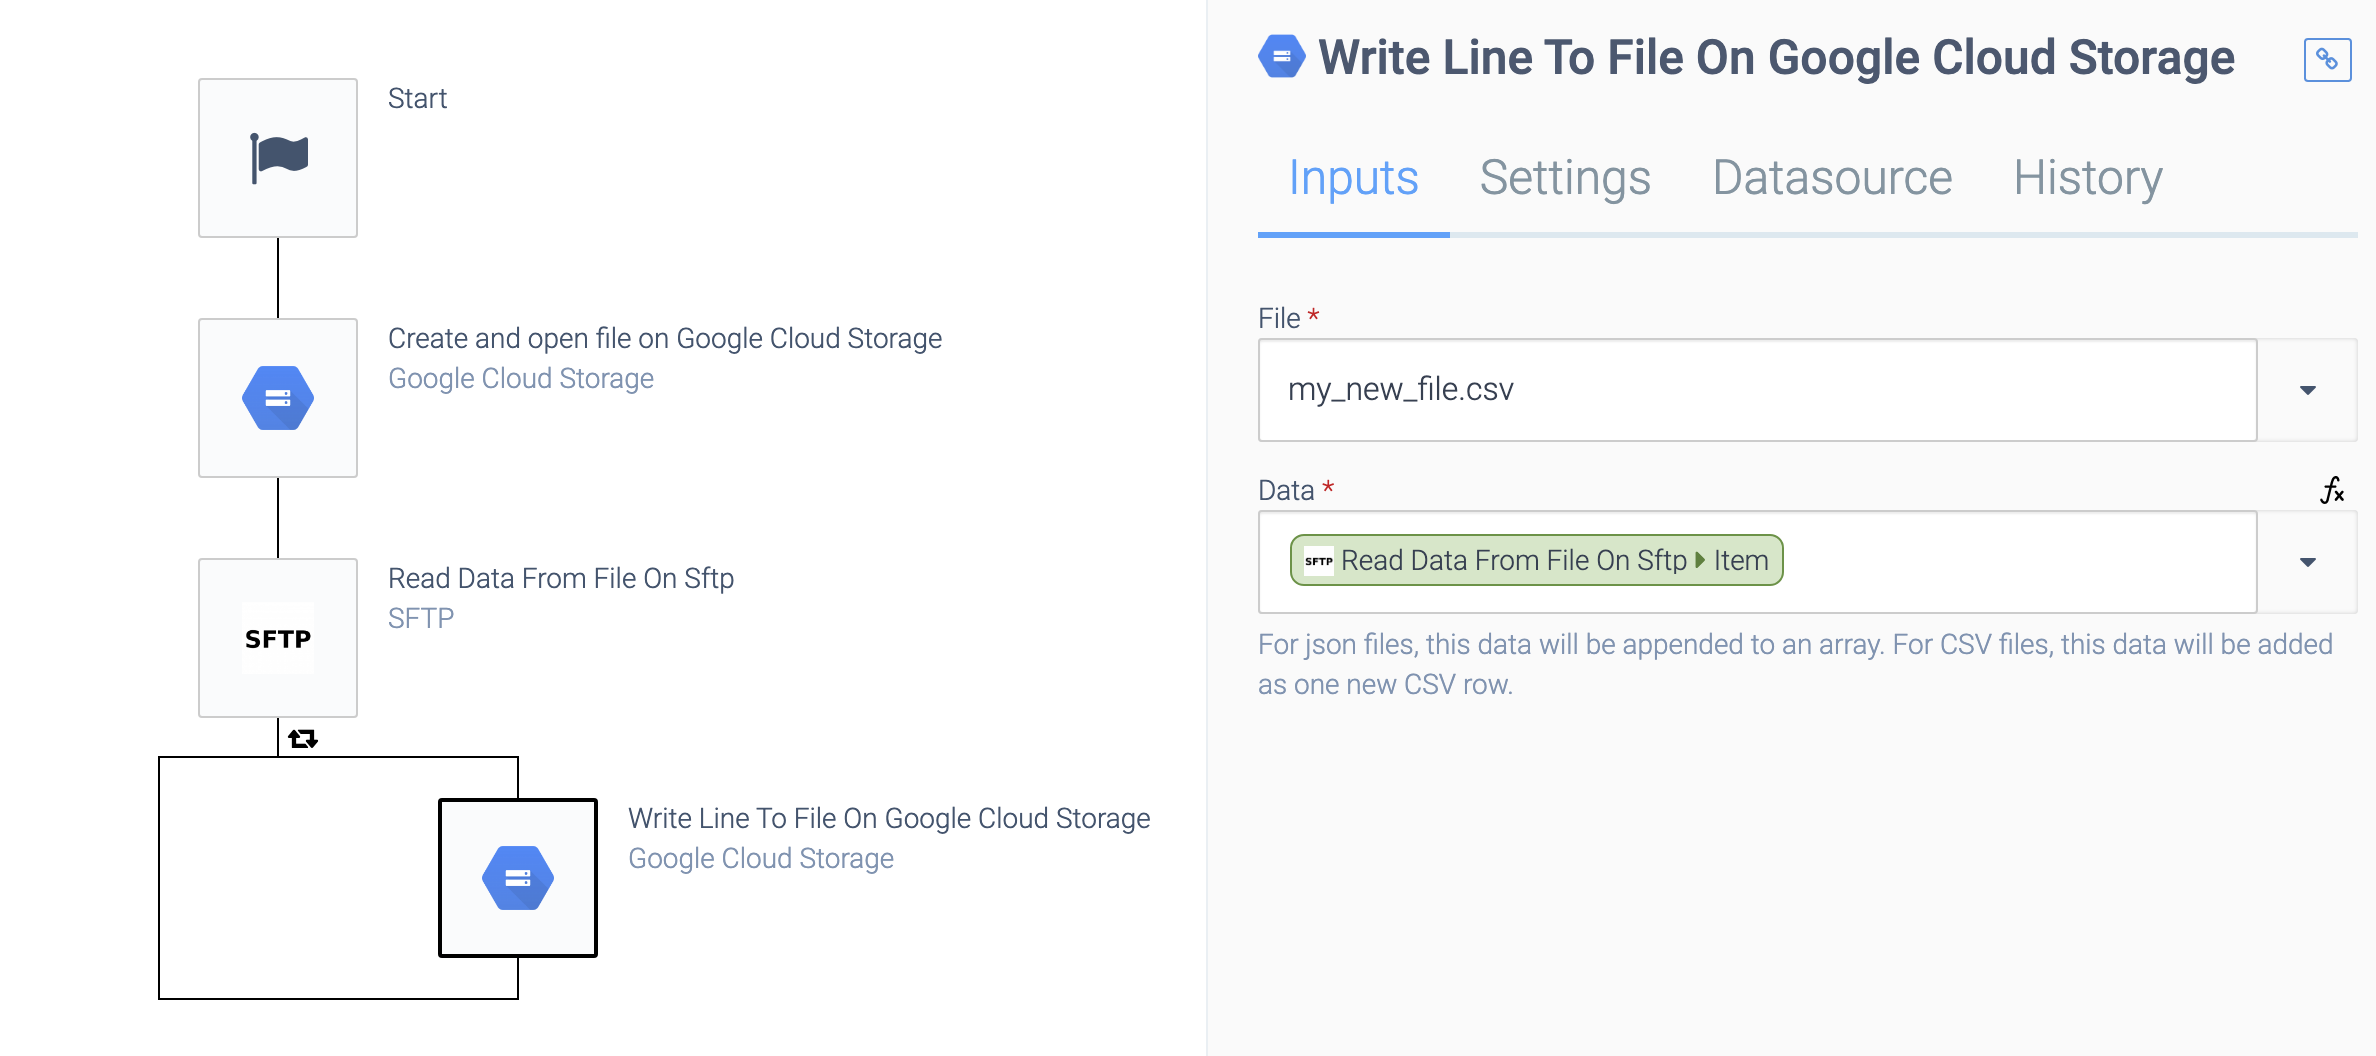 an automation consisting of a Start block, a Create and open file on Google Cloud Storage block, a Read Data From File On Sftp block, and a Write Line To File On Google Cloud Storage block in a loop. The final block accesses a new file and writes data from the Sftp file to it.